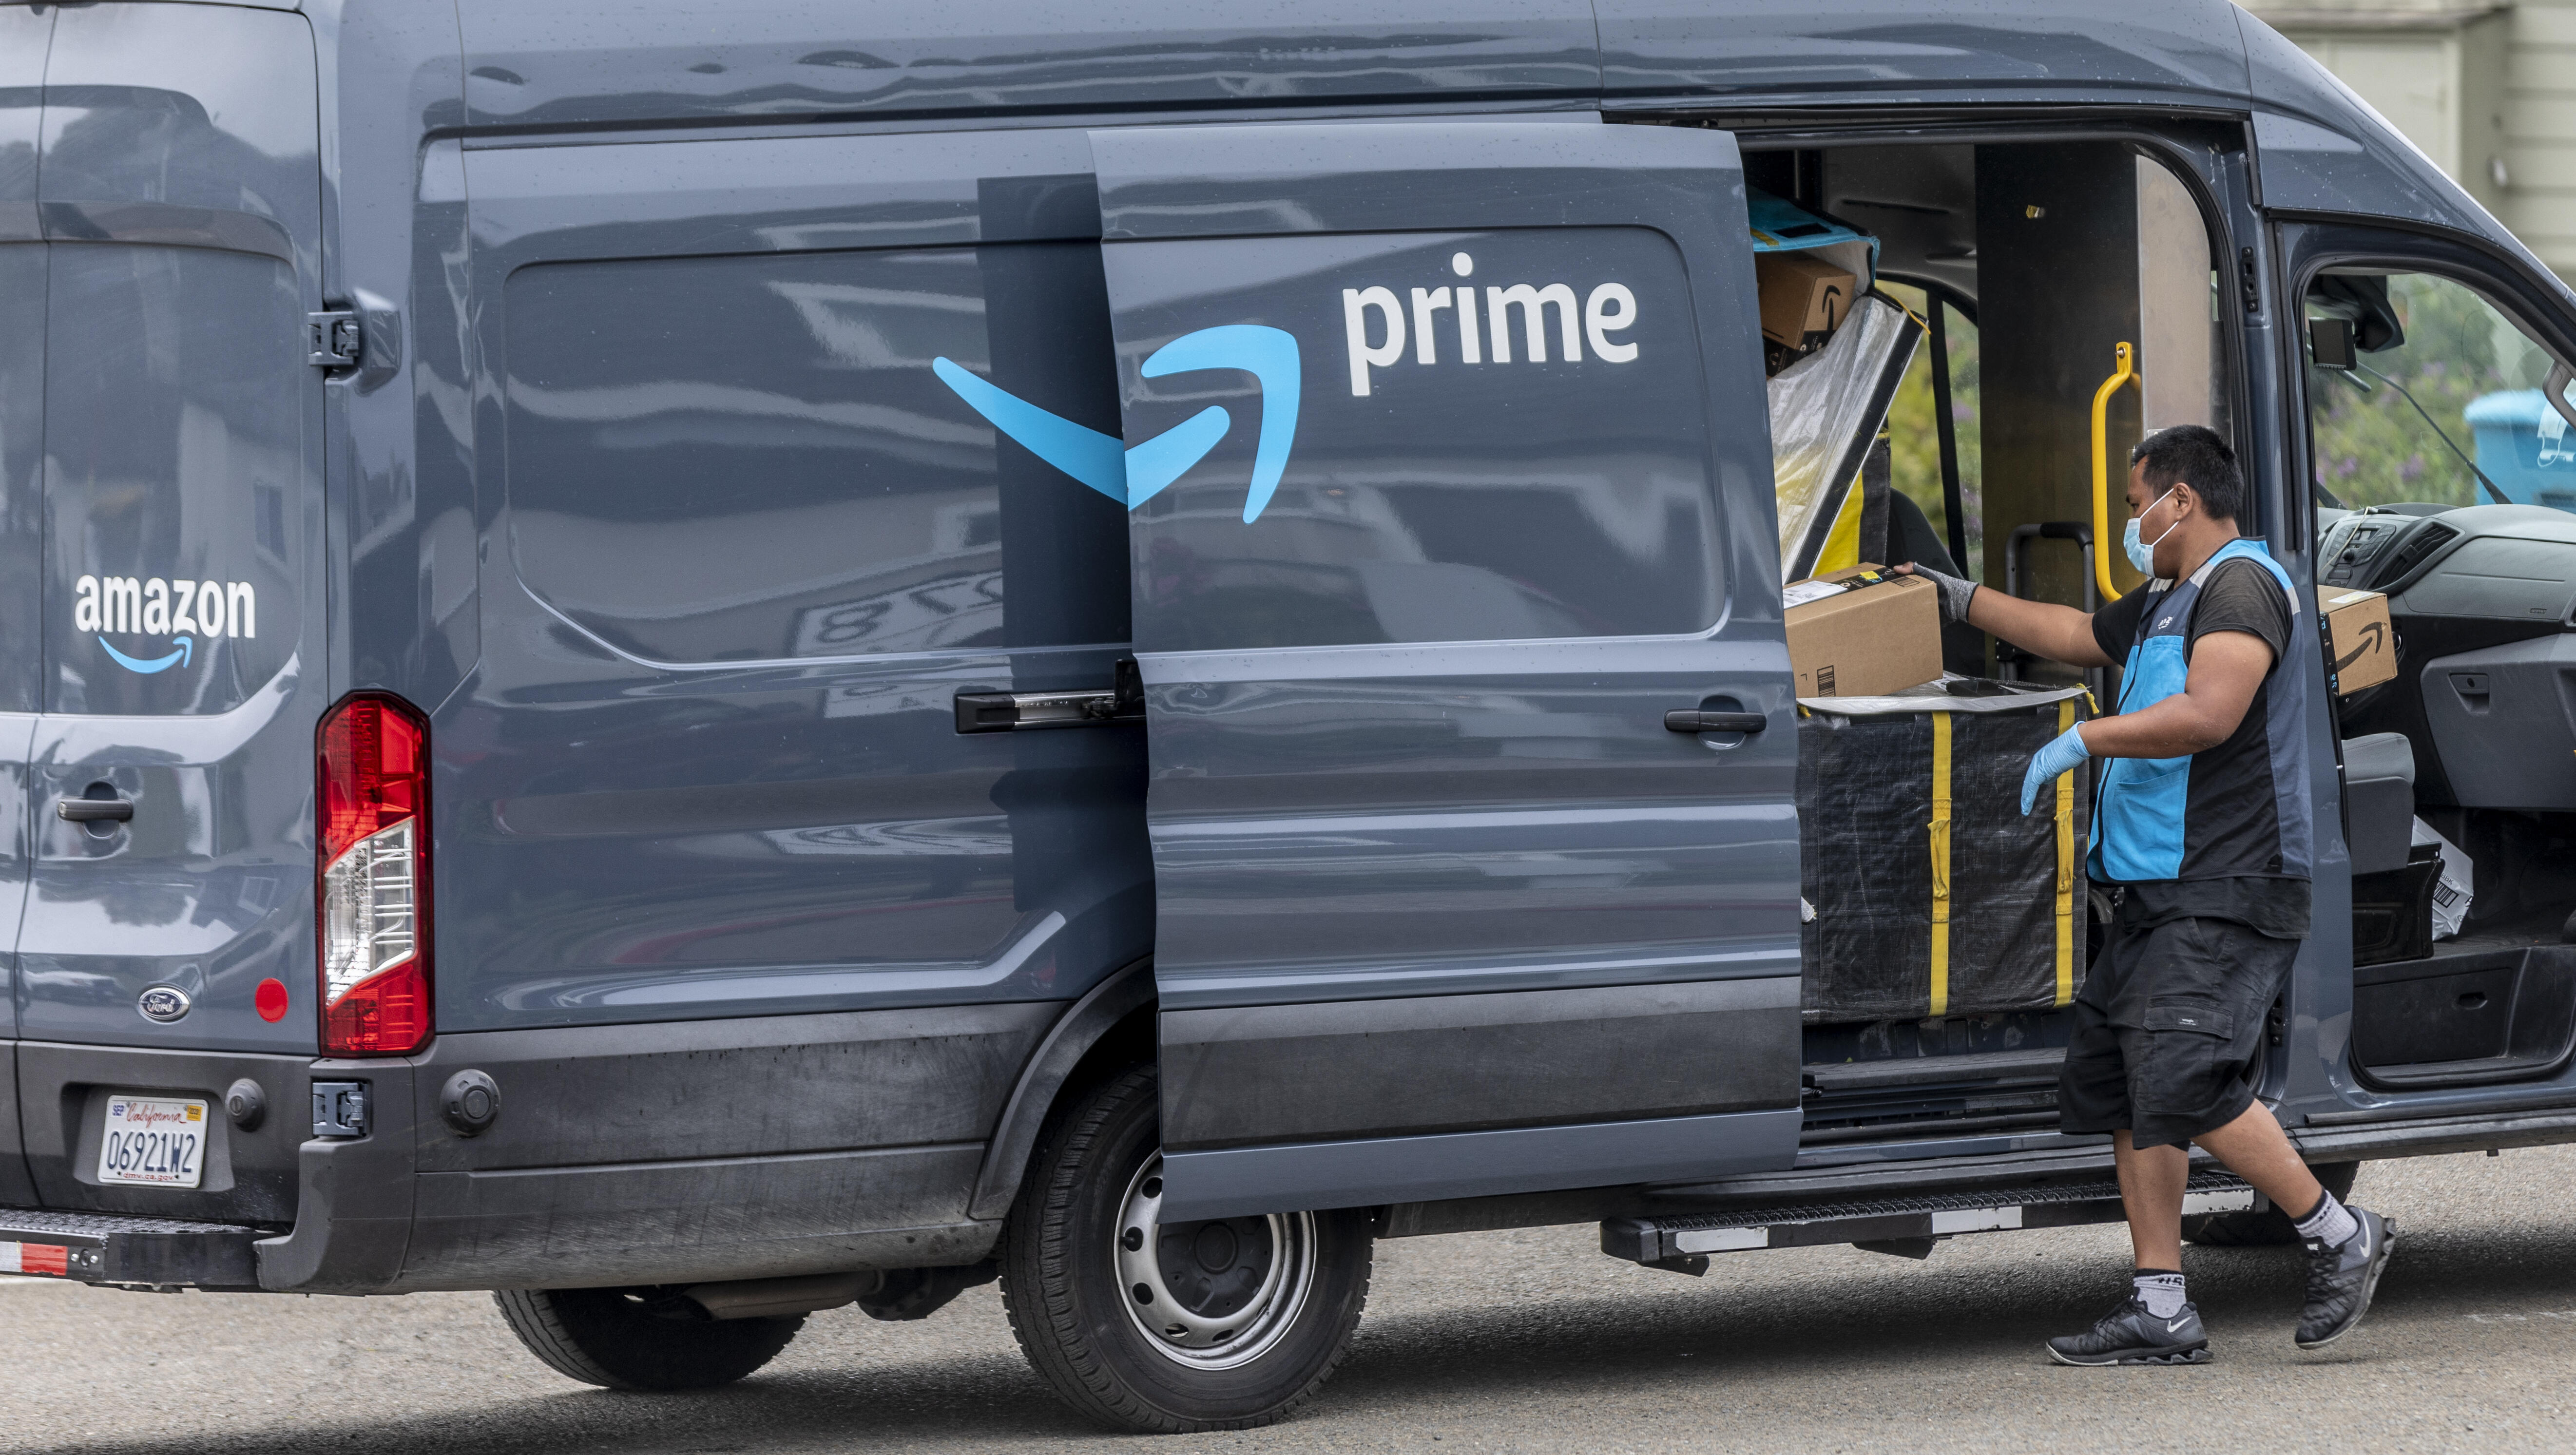 Amazon Delivery Driver Leaves Package at Smoking Garage, Doesn't Call 911